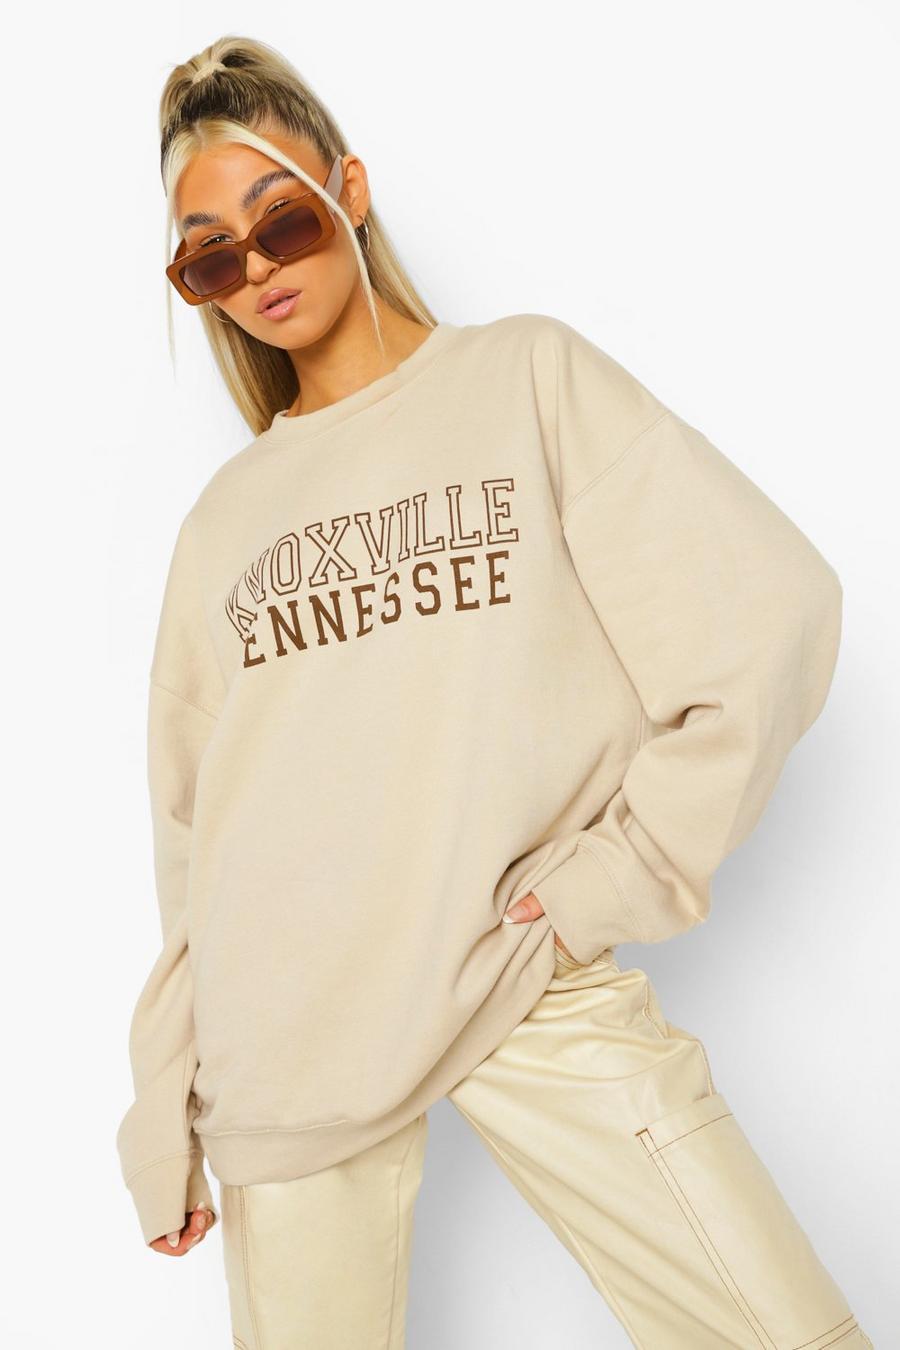 Sand Tall - "Knoxville" Oversize sweatshirt image number 1